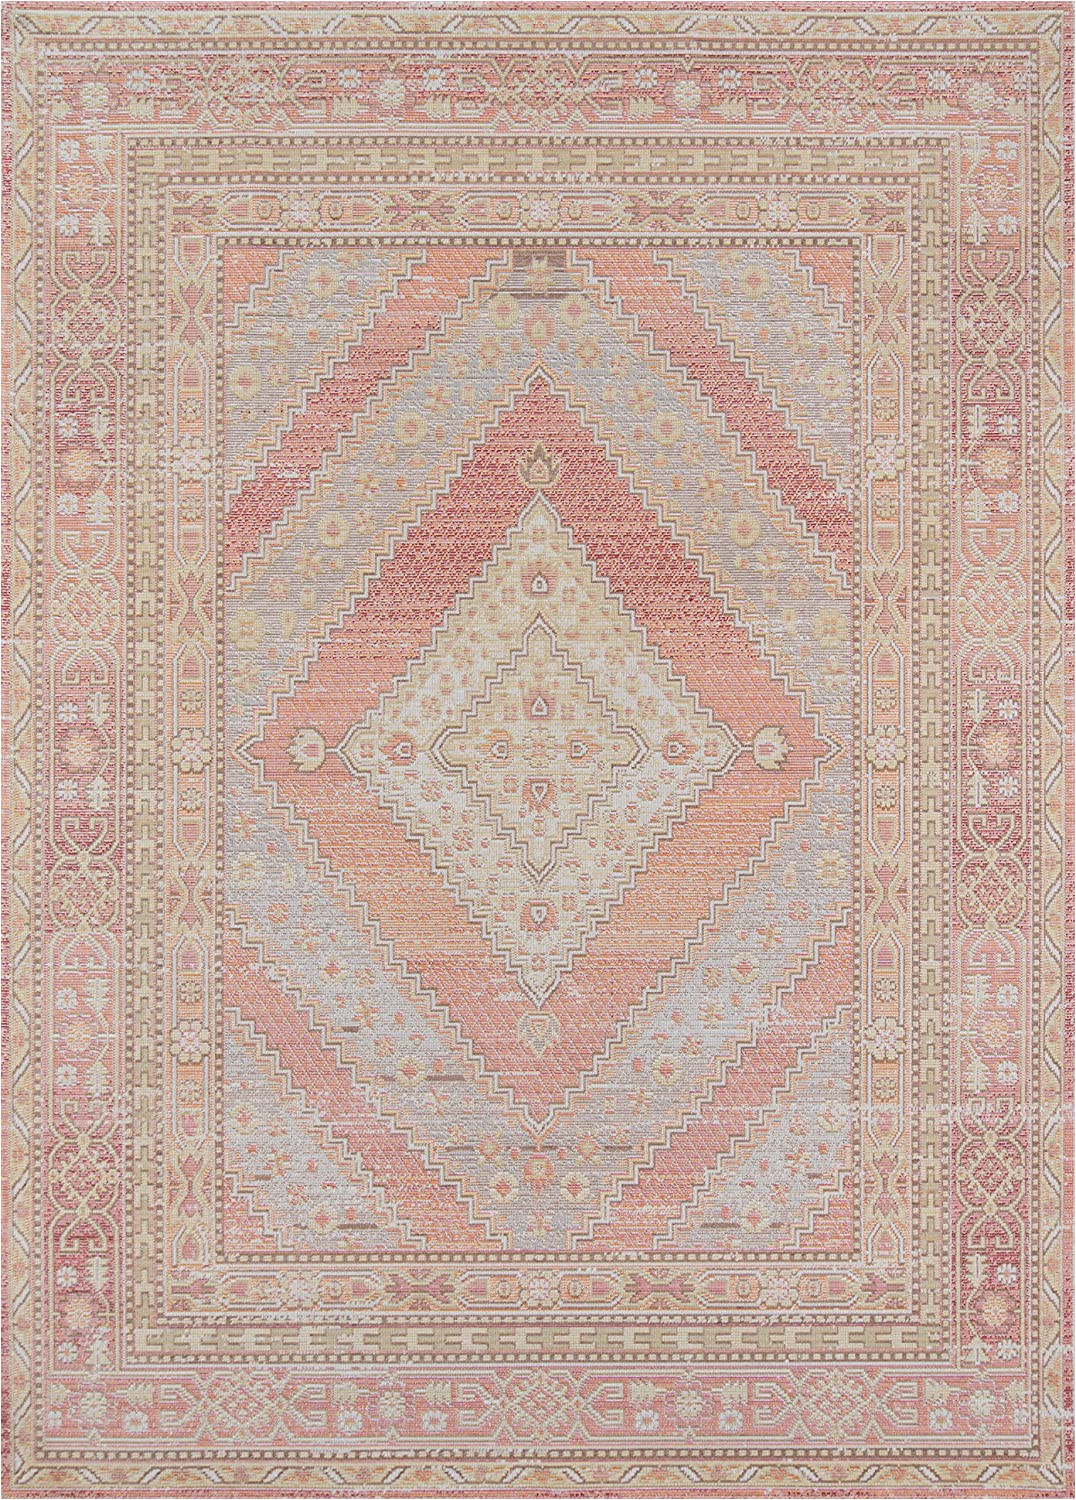 Blush and Gold area Rug Momeni isabella Traditional Geometric Flat Weave area Rug 2 0" X 3 0" Pink